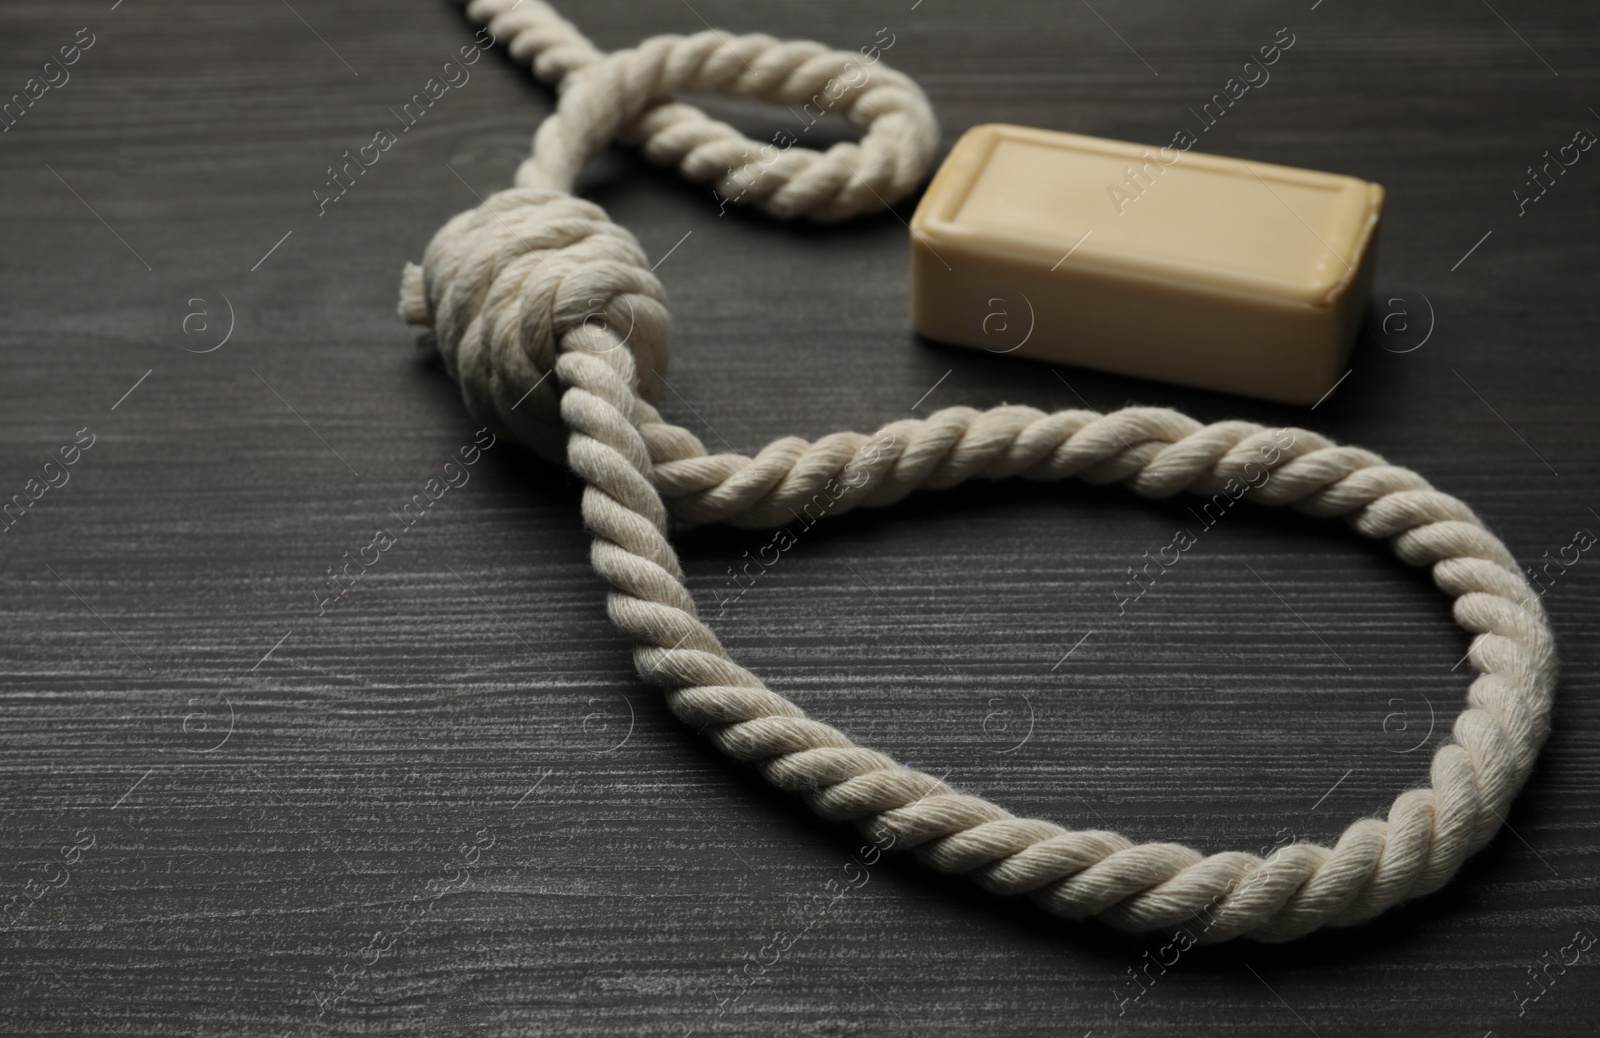 Photo of Rope noose and soap bar on dark wooden table